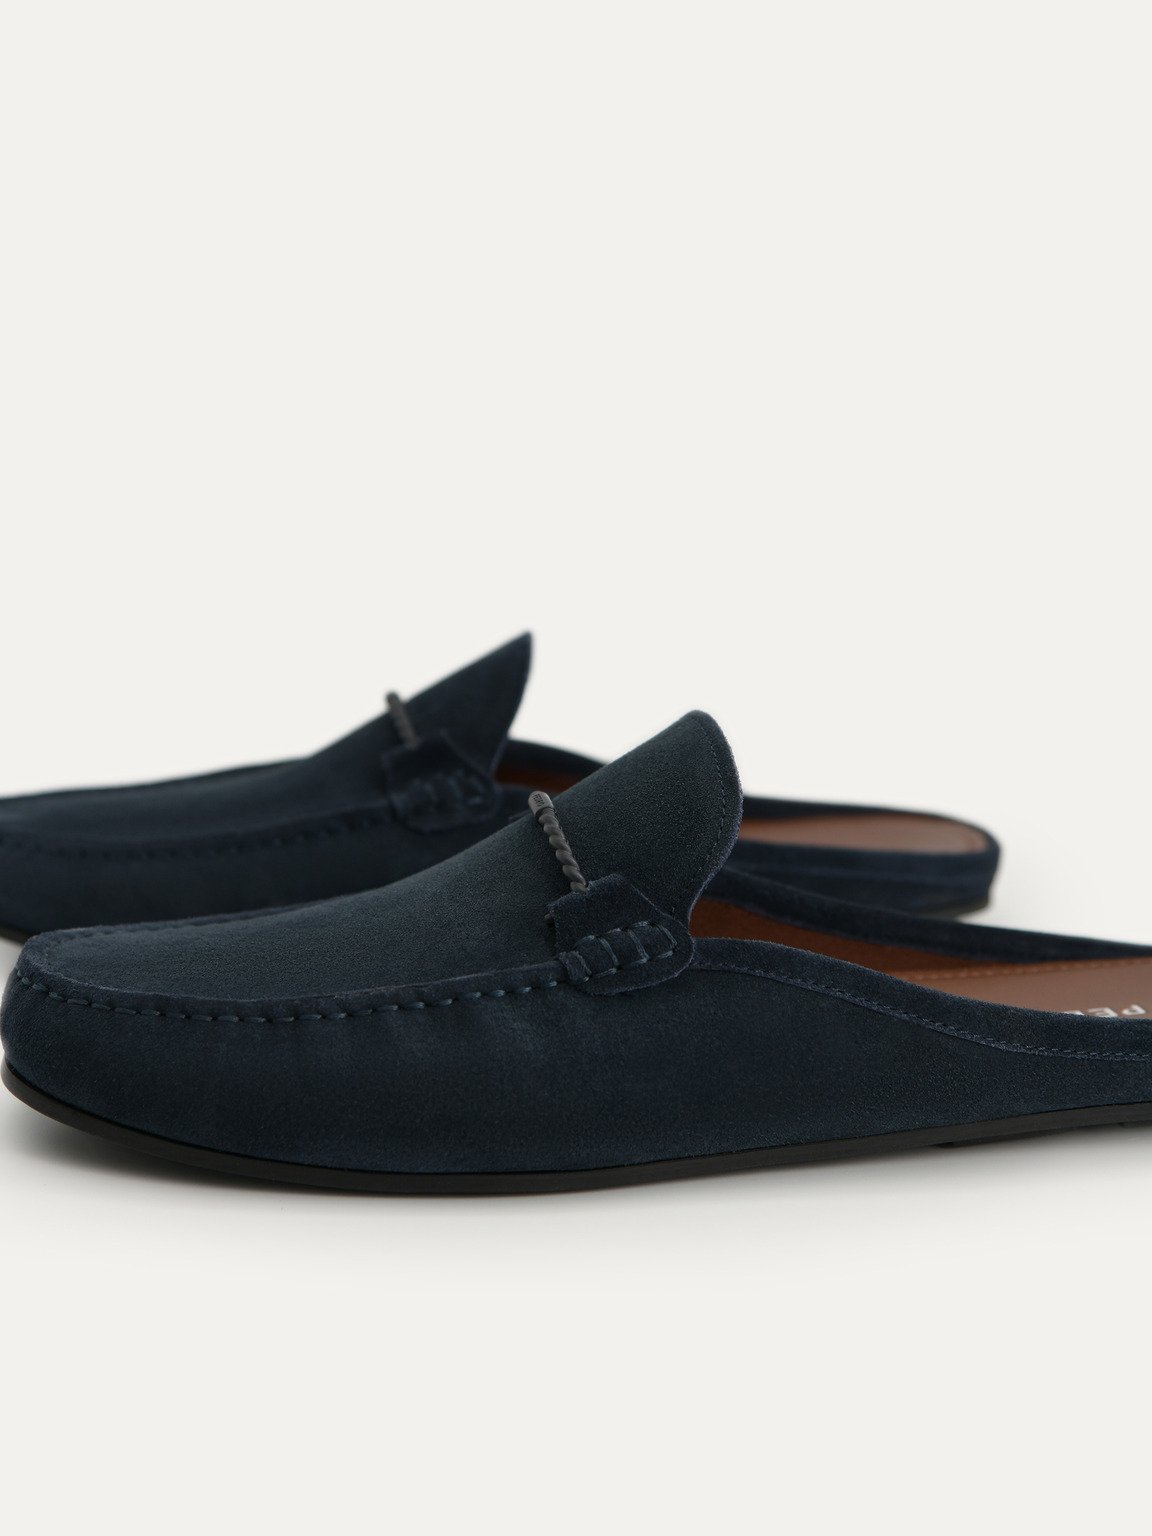 Suede Slip-On Driving Shoes, Navy